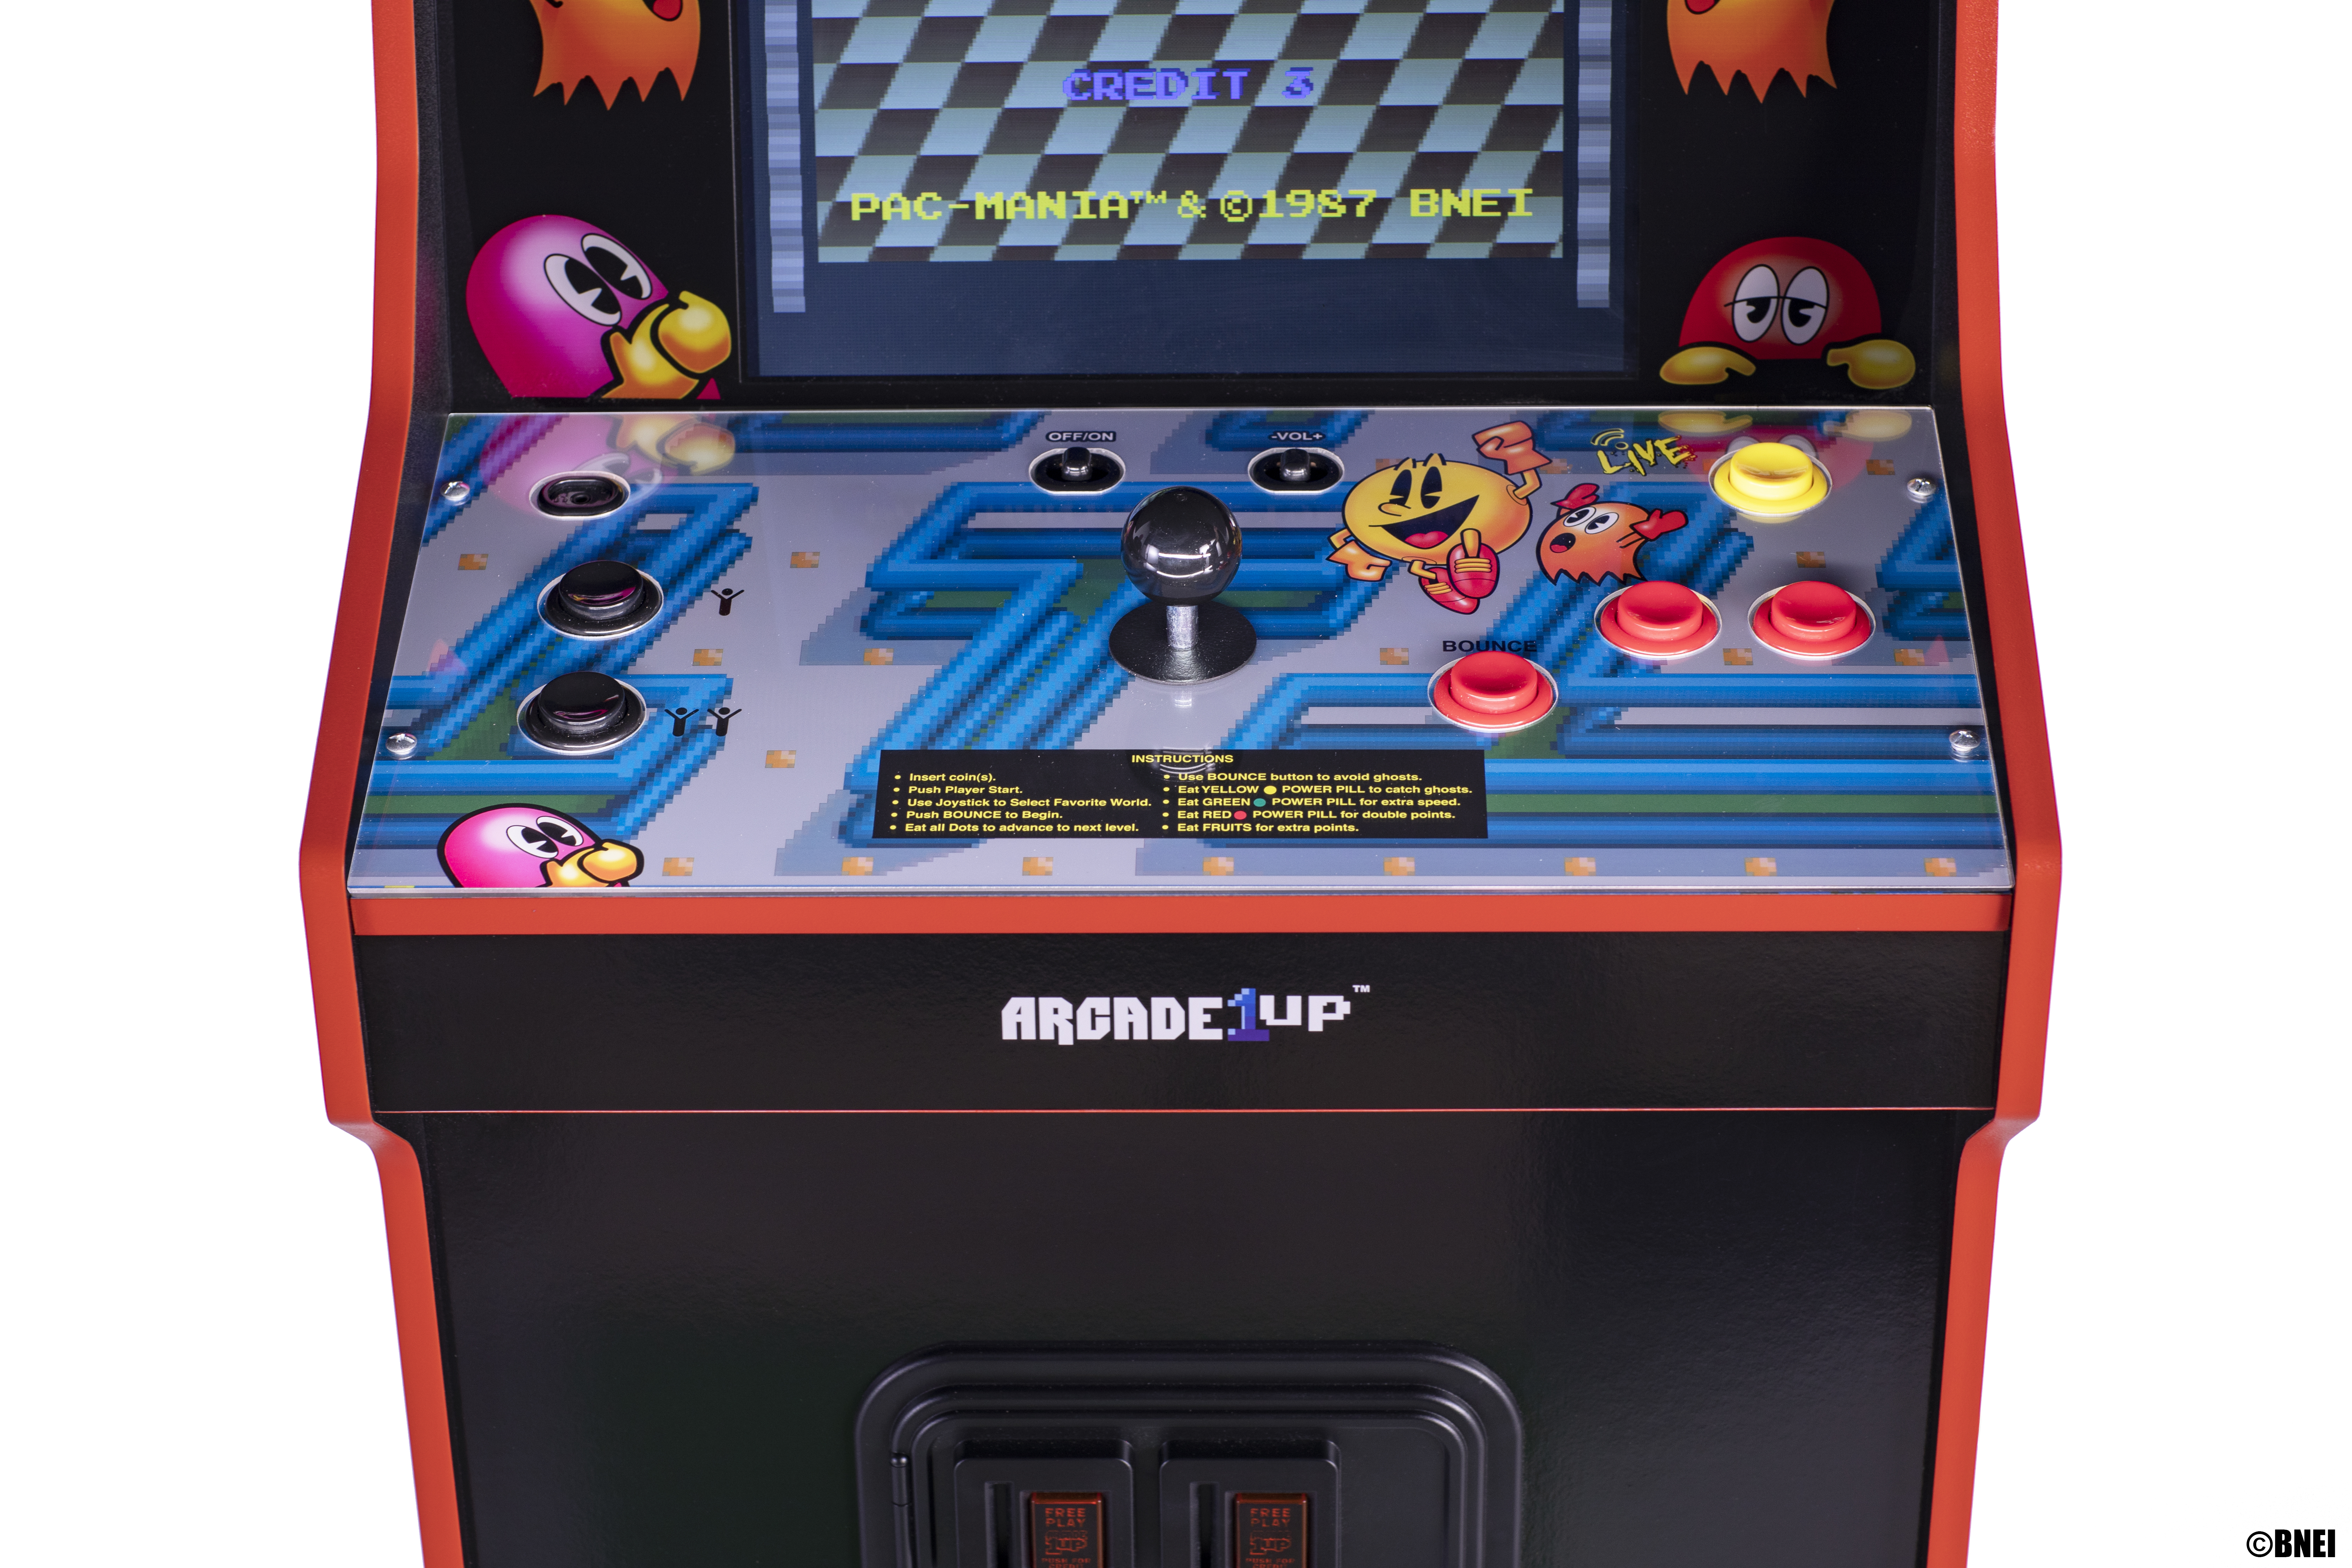 ARCADE Pac Wifi 1UP Legacy Mania 14in1